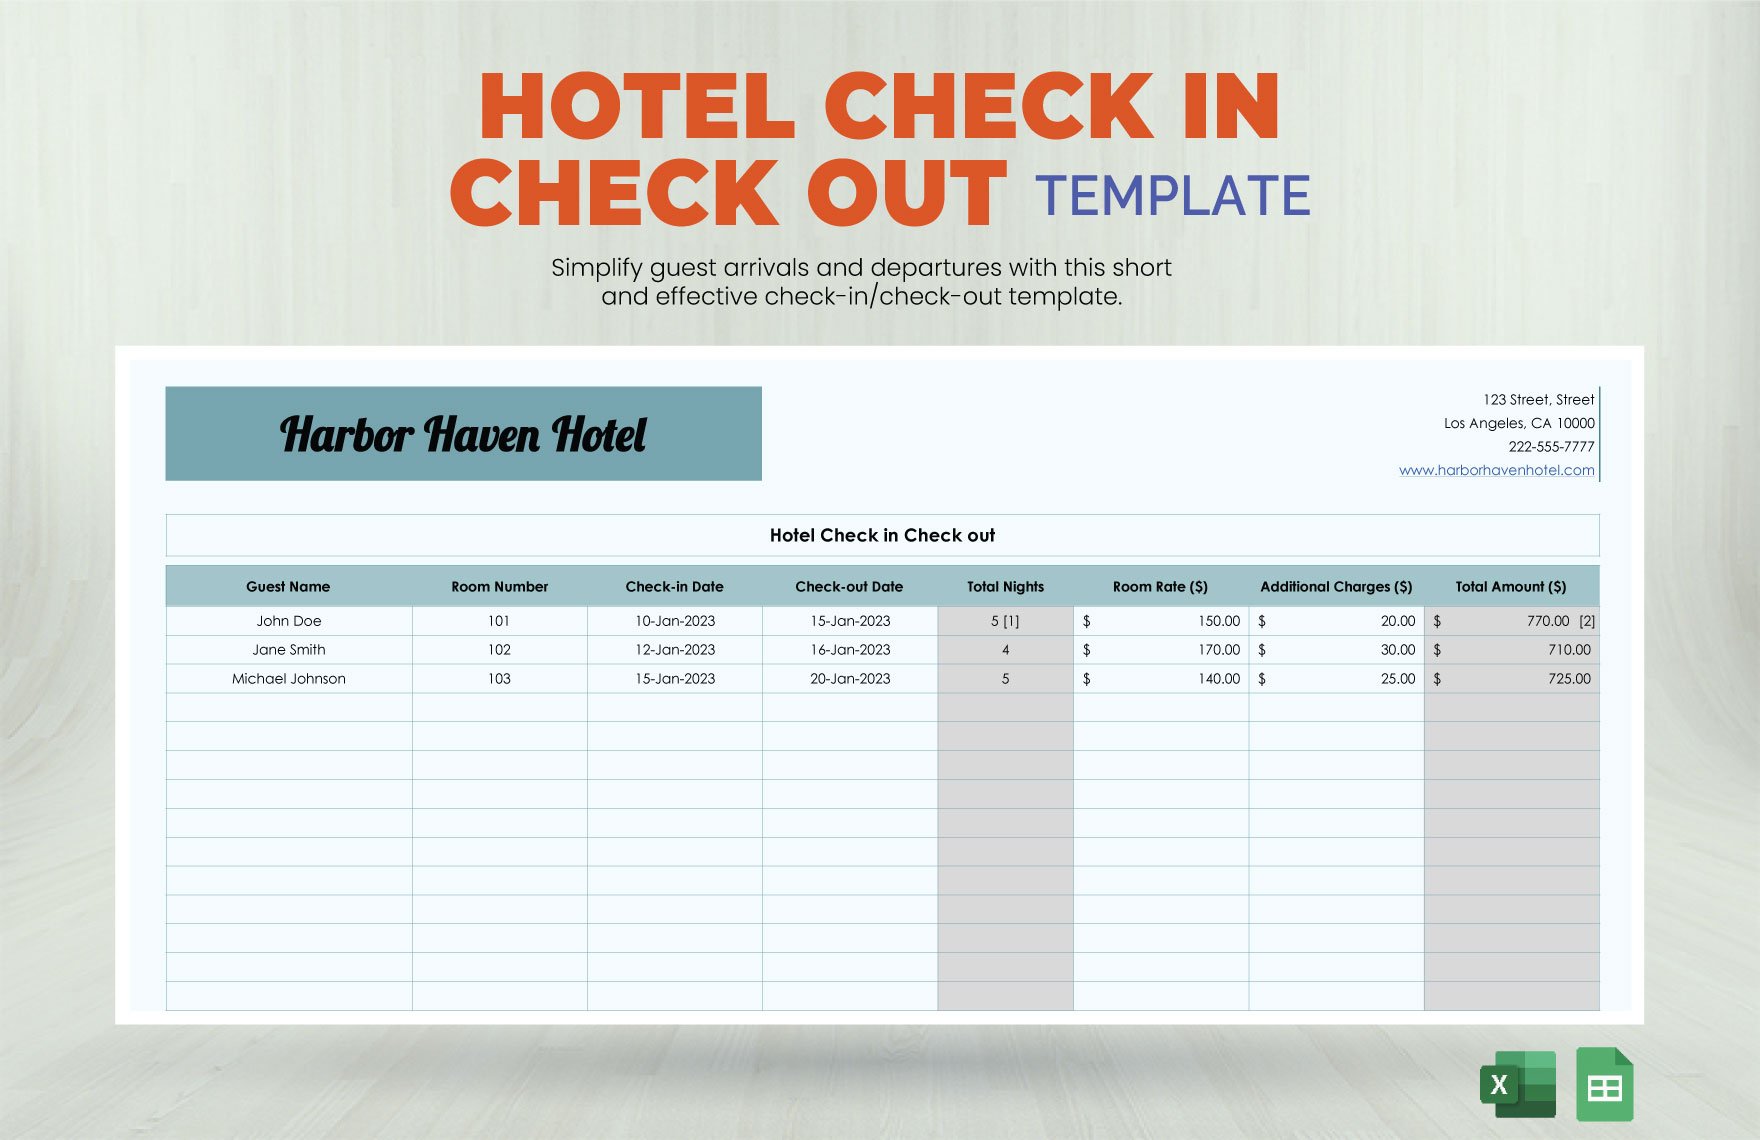 Hotel Check in Check out Template